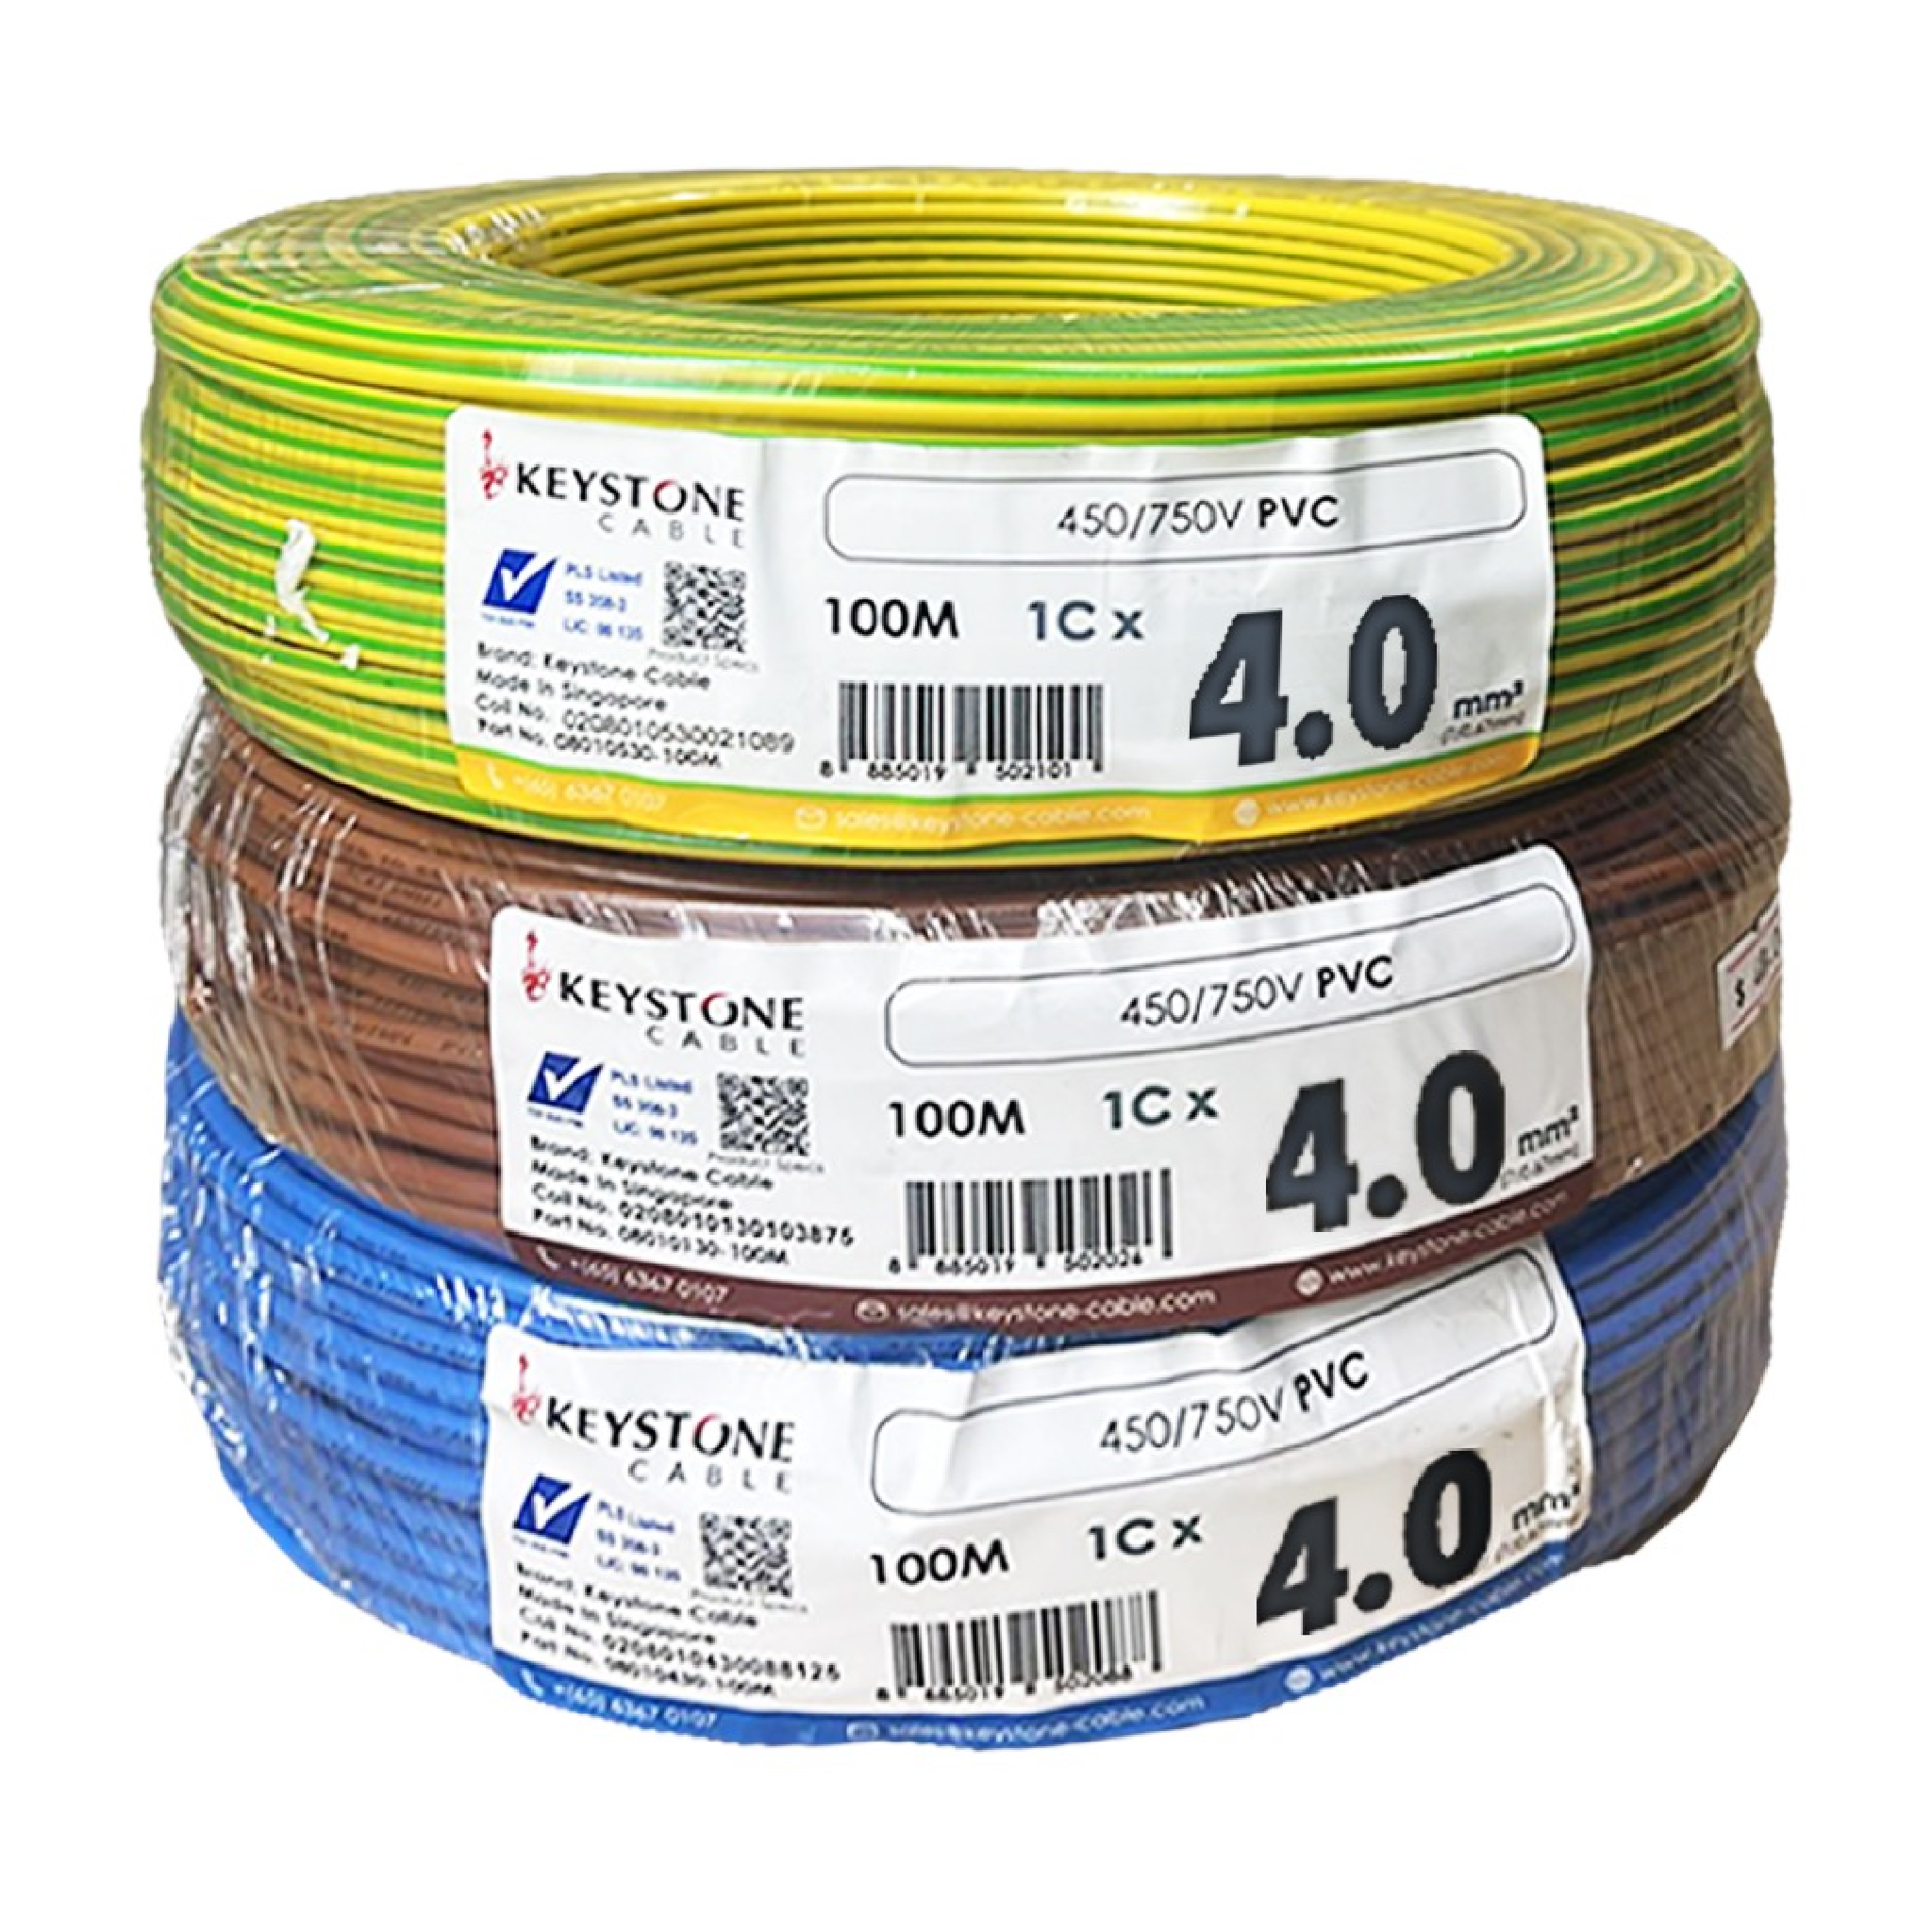 KEYSTONE PVC Insulated Non-Sheathed Cable 4.0mm2 450/750V X 100Metres